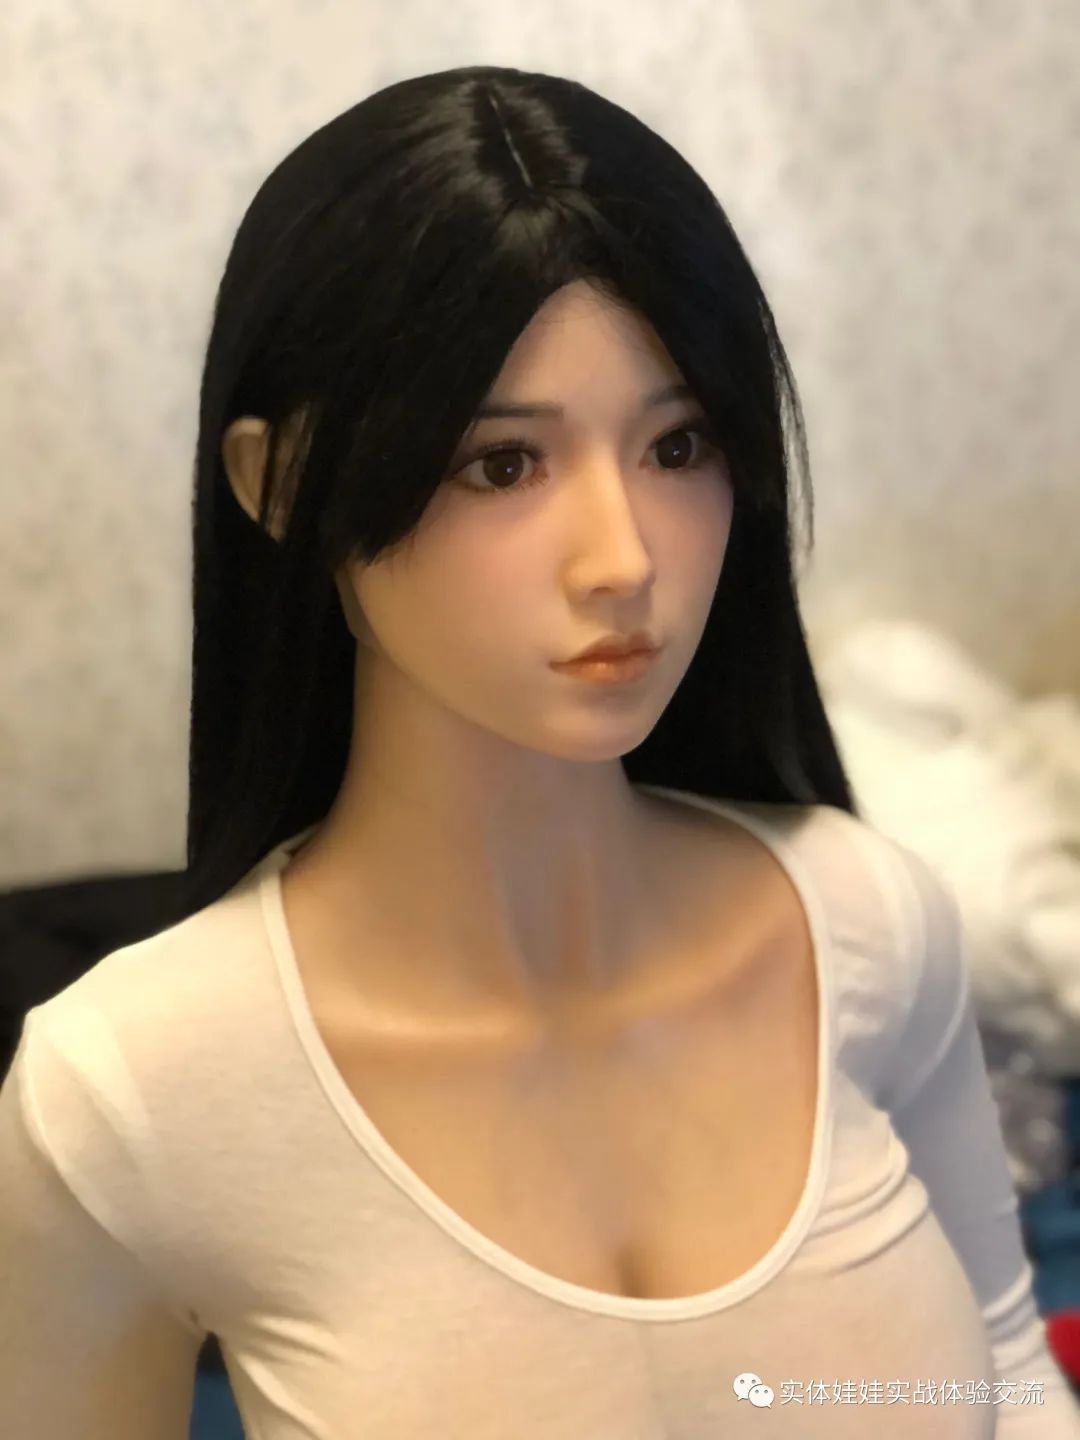 How to deal with sticky skin on silicone dolls and how to solve sticky surface on silicone dolls